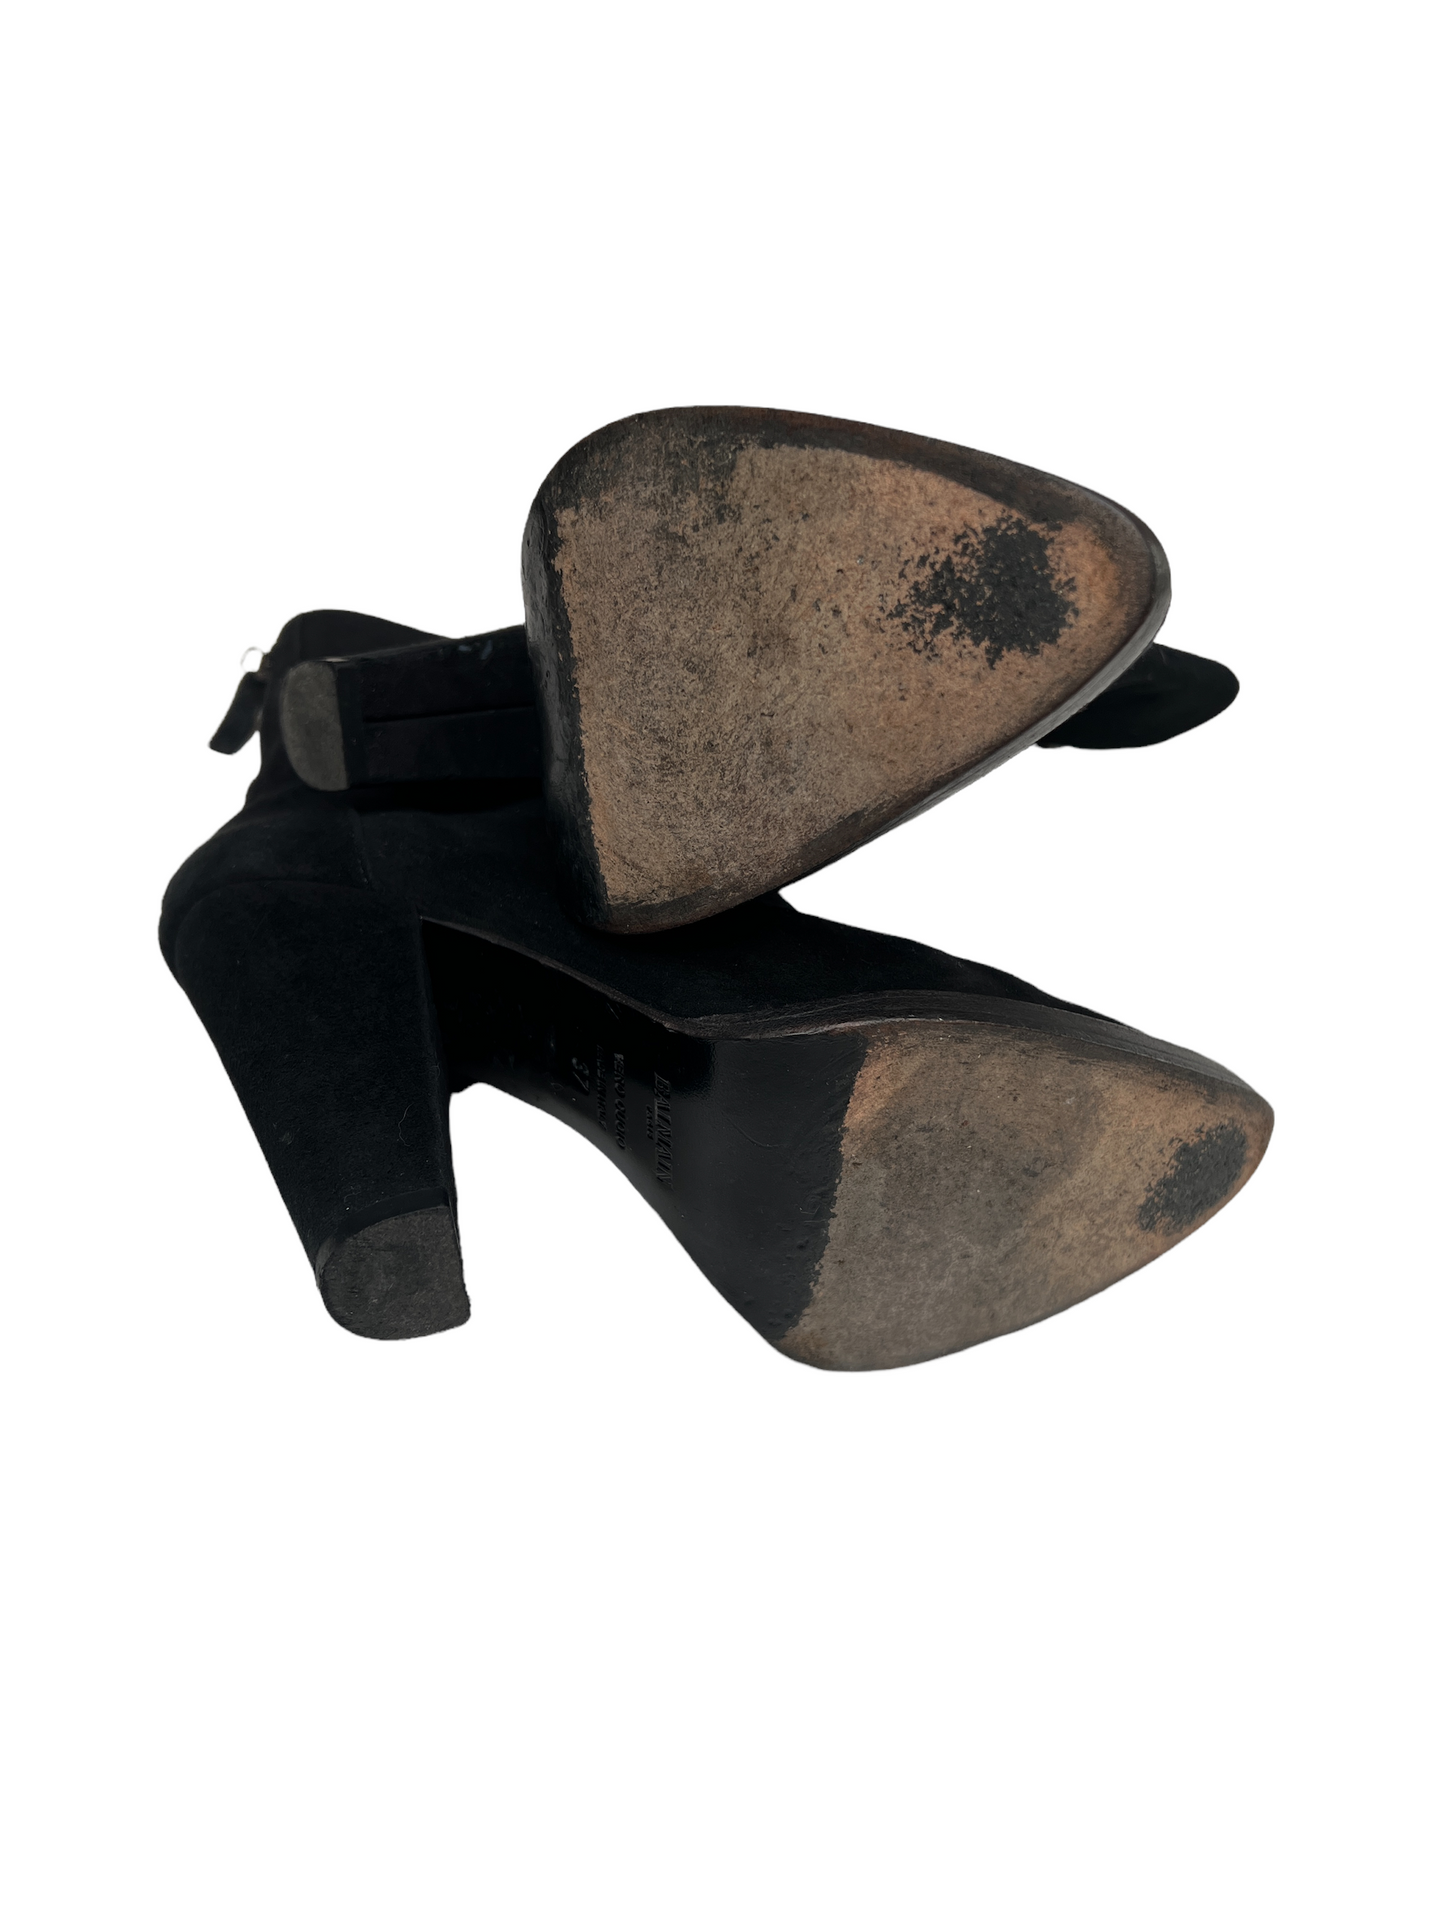 Black Suede Heeled Boots - 6.5